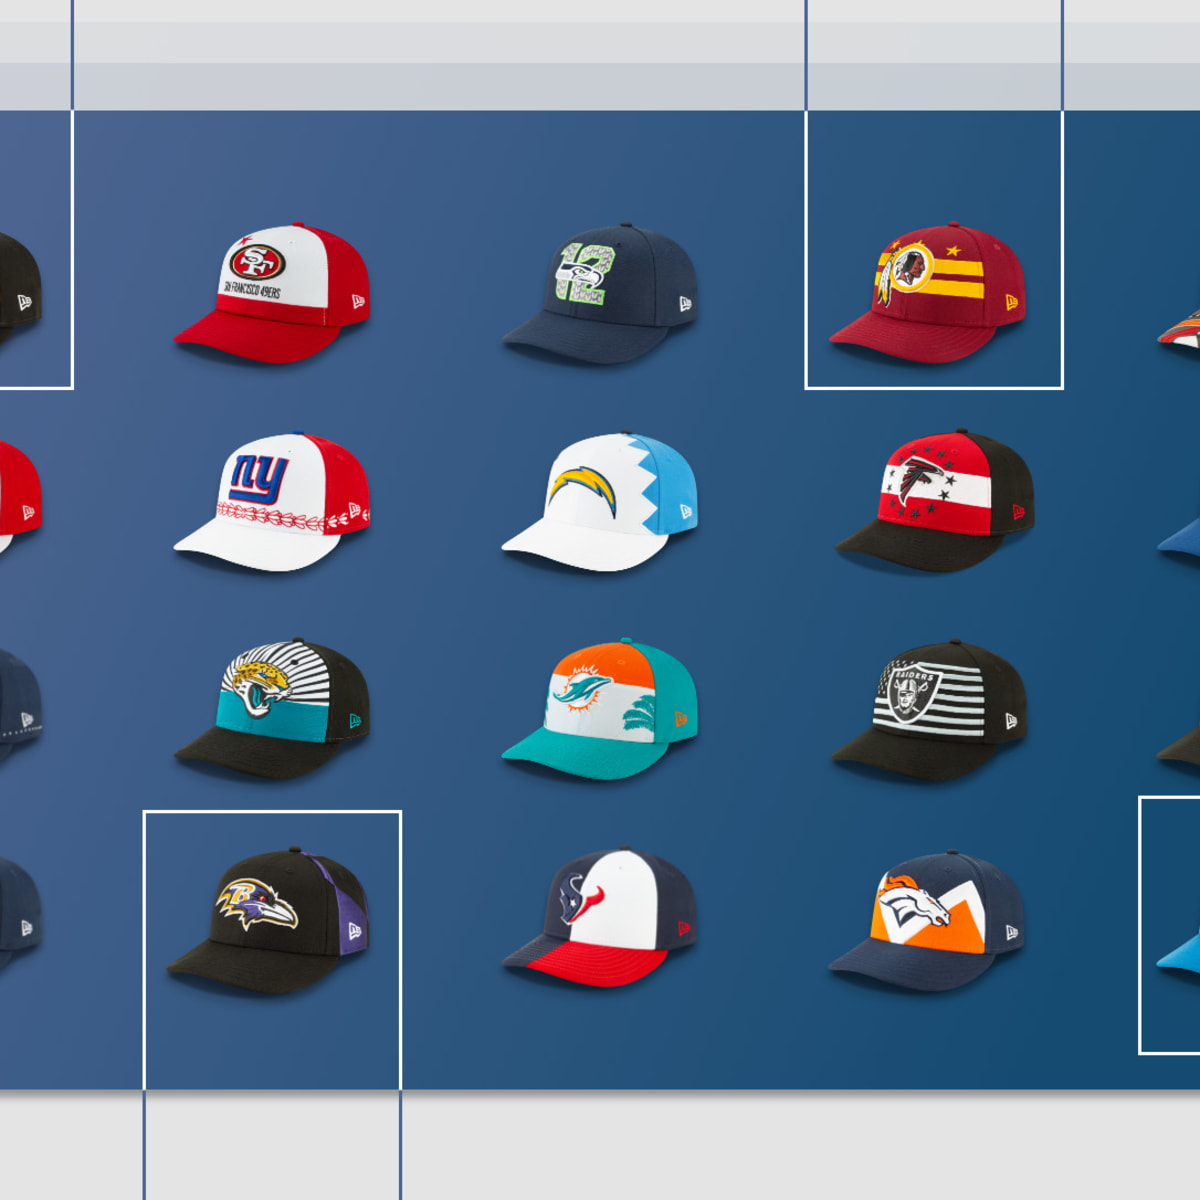 NFL draft 2019 hats: An exclusive look 